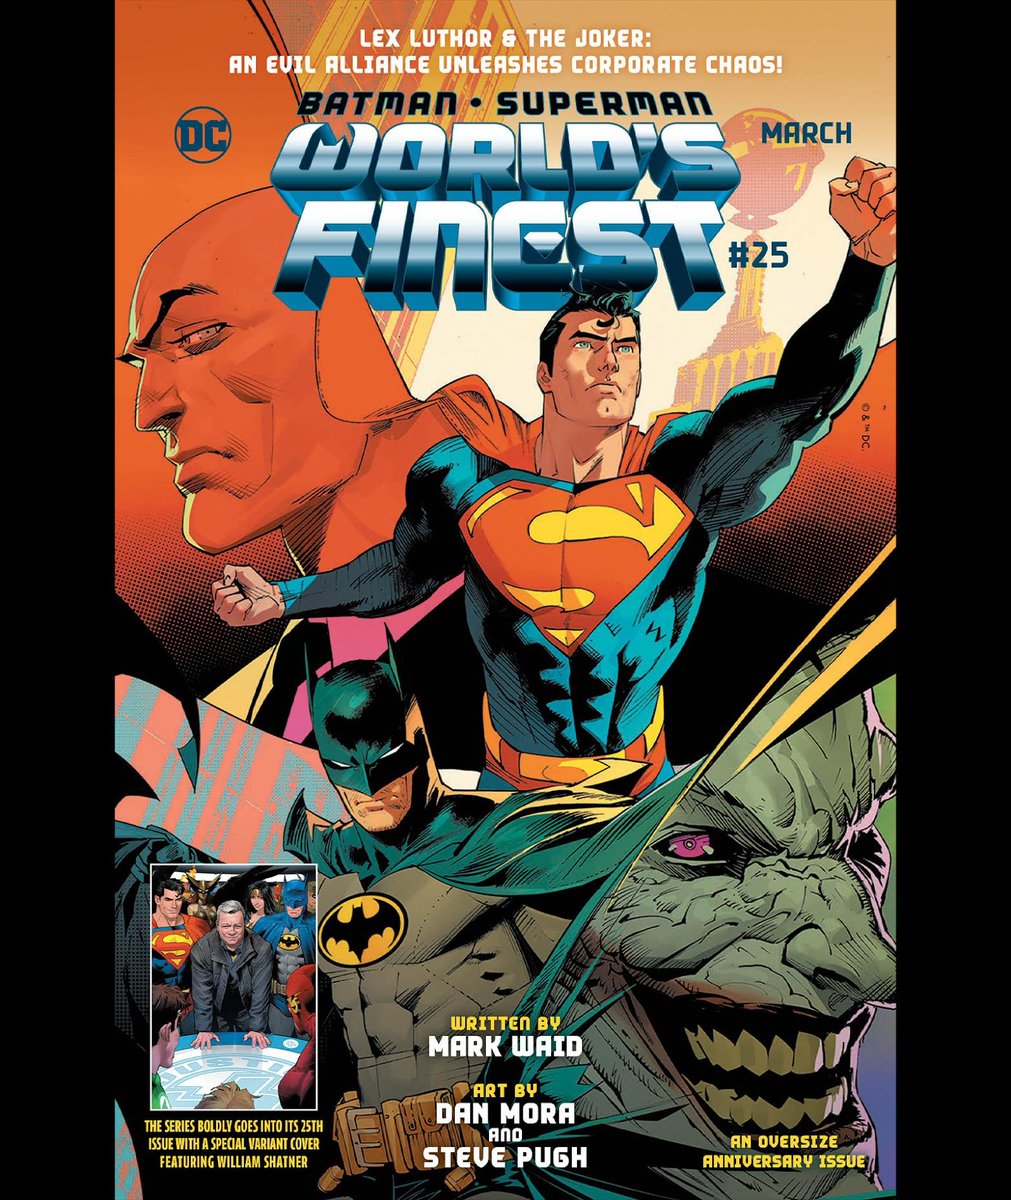 Batman/Superman: World’s Finest #25, an oversize anniversary issue! FOC date for this is Sunday, 2/25